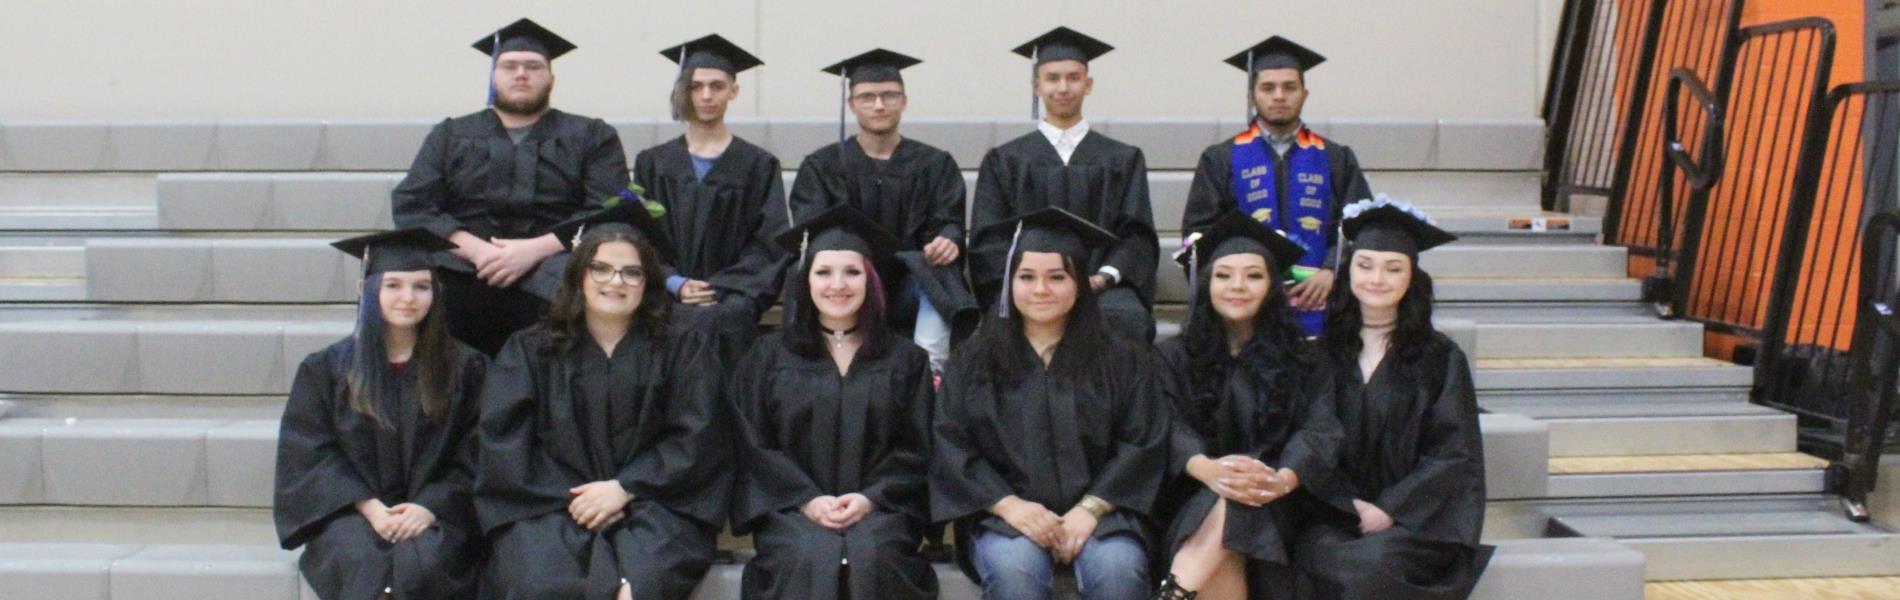 Eleven graduates dressed in black caps and gowns sit in two rows on gray bleachers. 